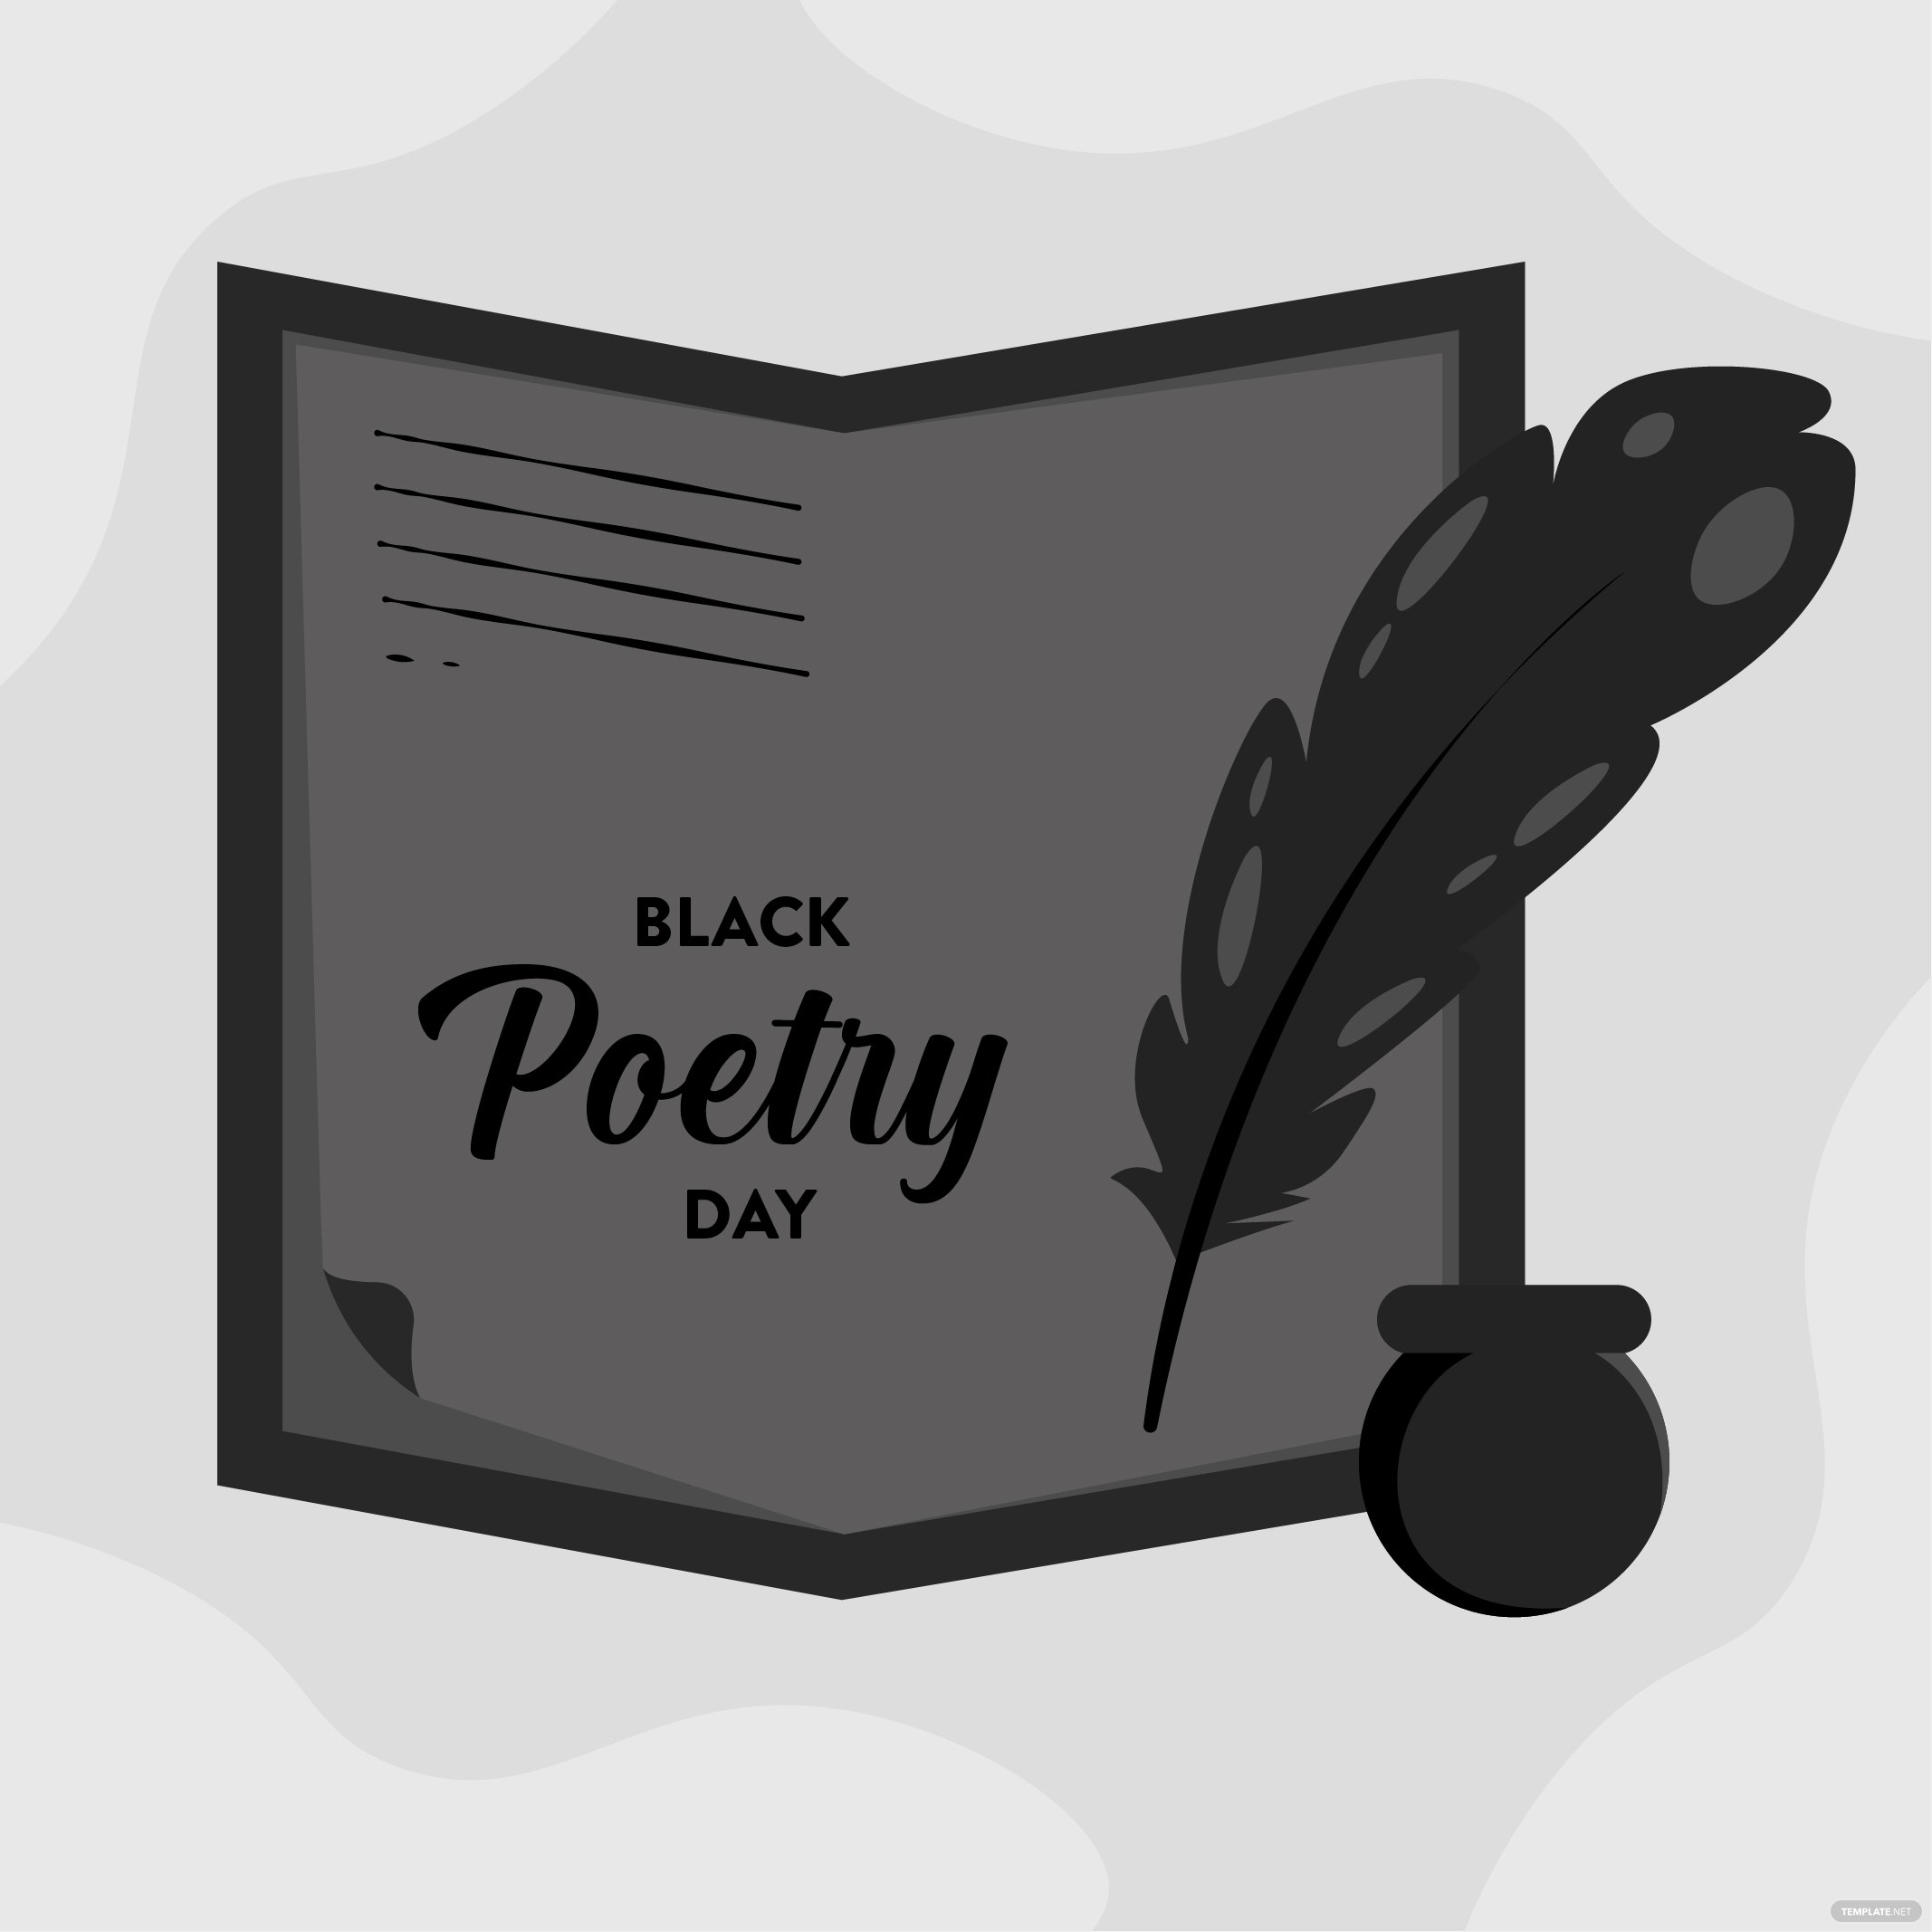 black poetry day illustration ideas and examples